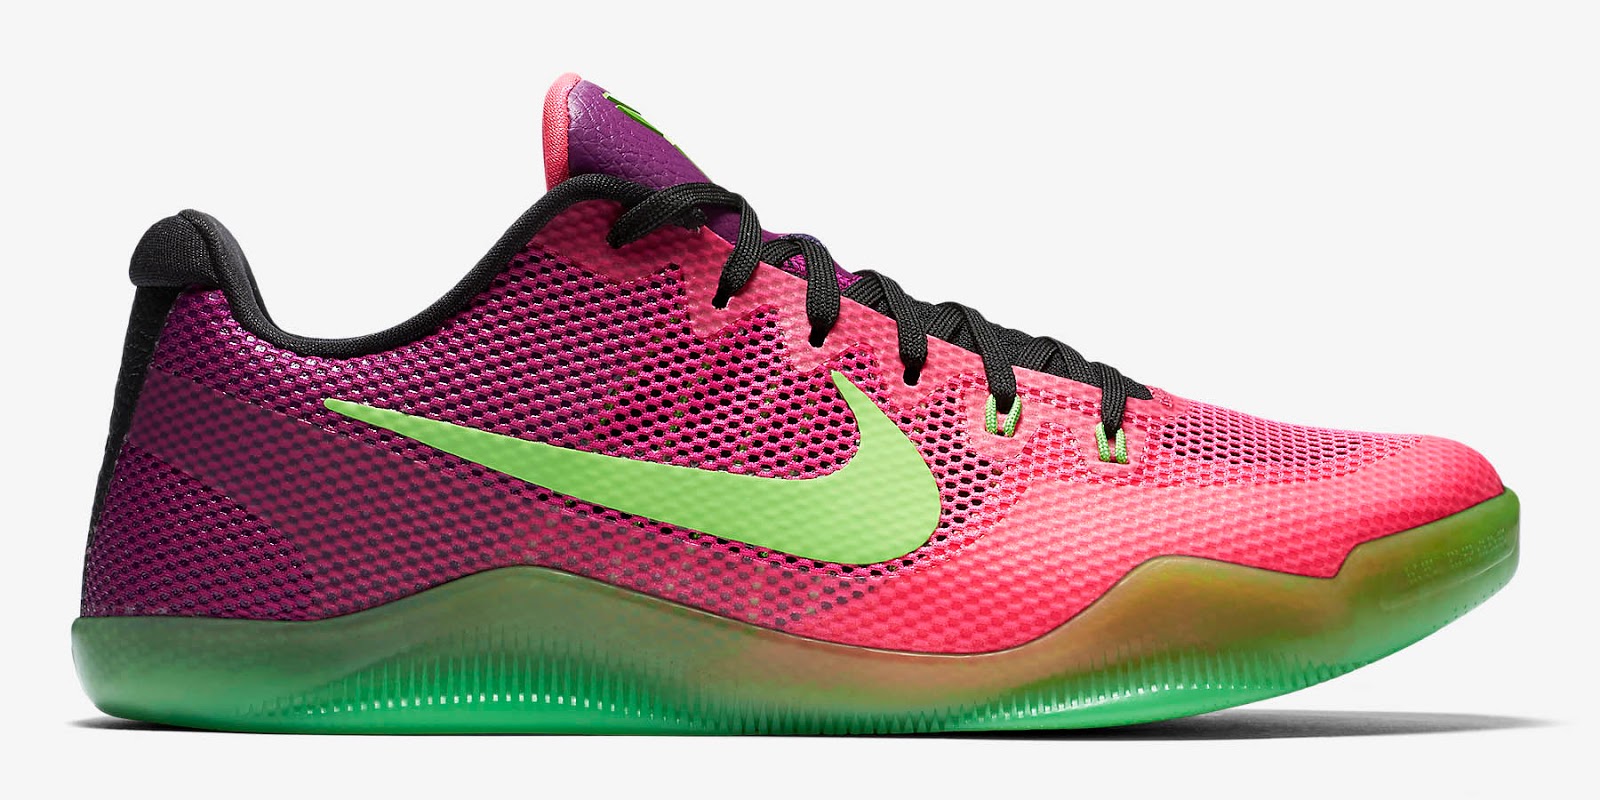 Nike Kobe 11 Mambacurial Boots Released1600 x 800